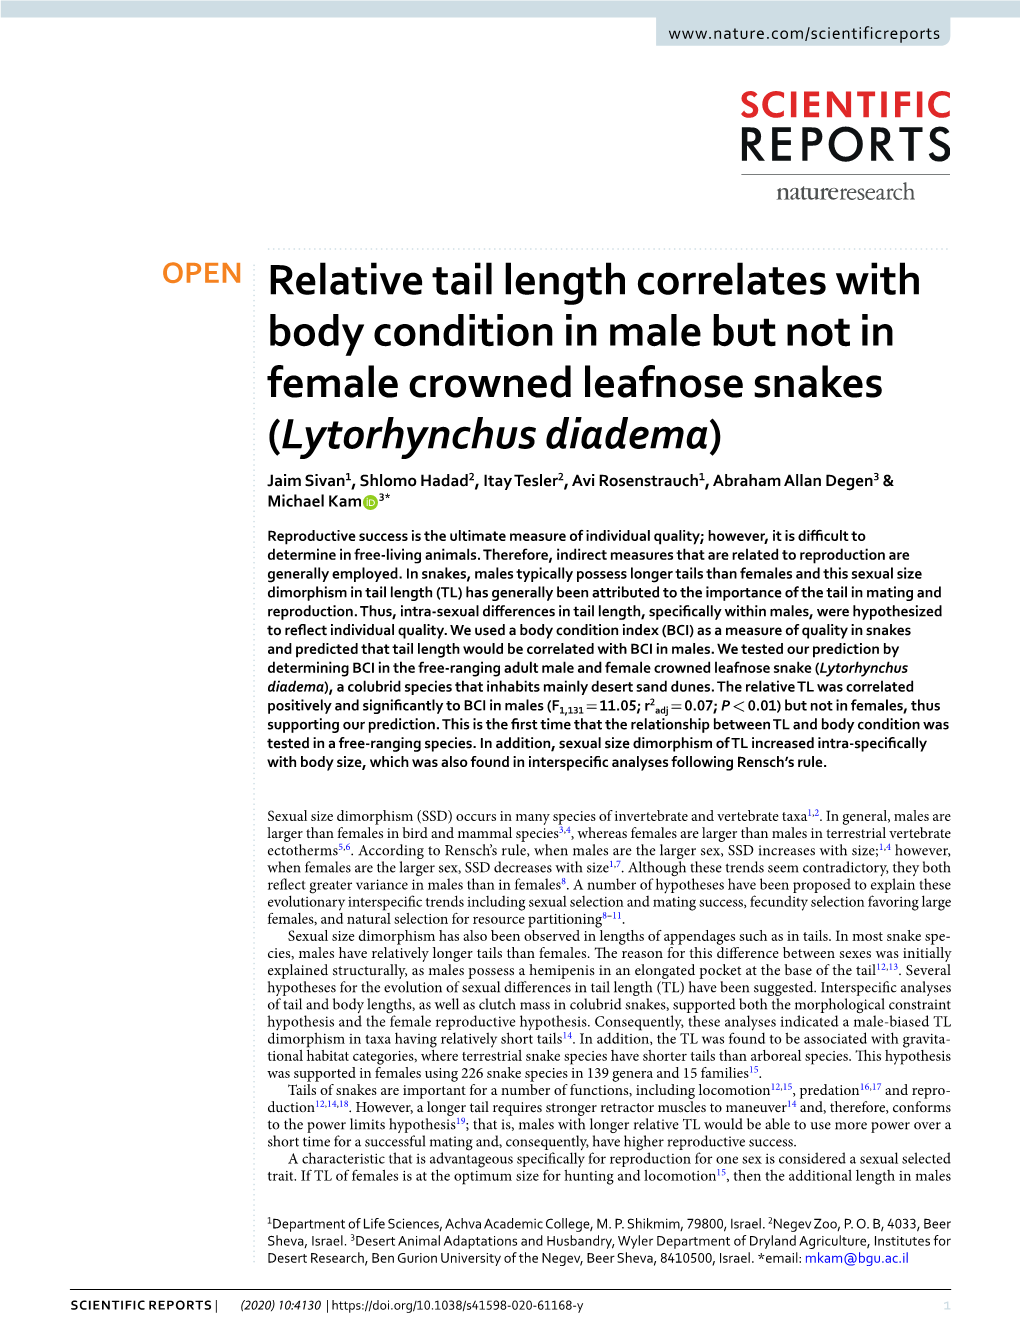 Relative Tail Length Correlates with Body Condition in Male but Not In